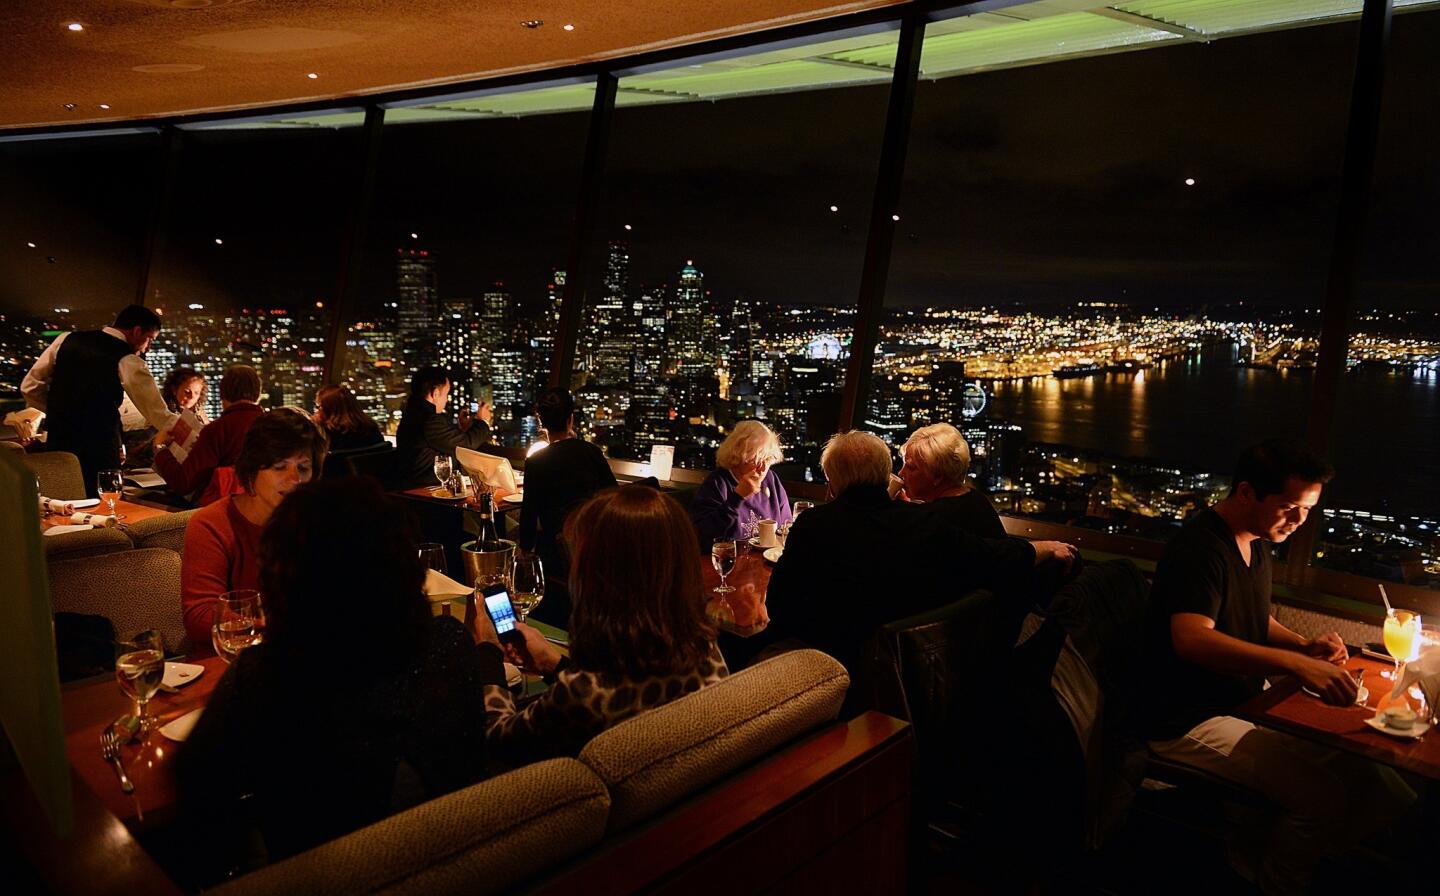 Diners enjoy food and cocktails at the SkyCity restaurant at the top of the Space Needle.